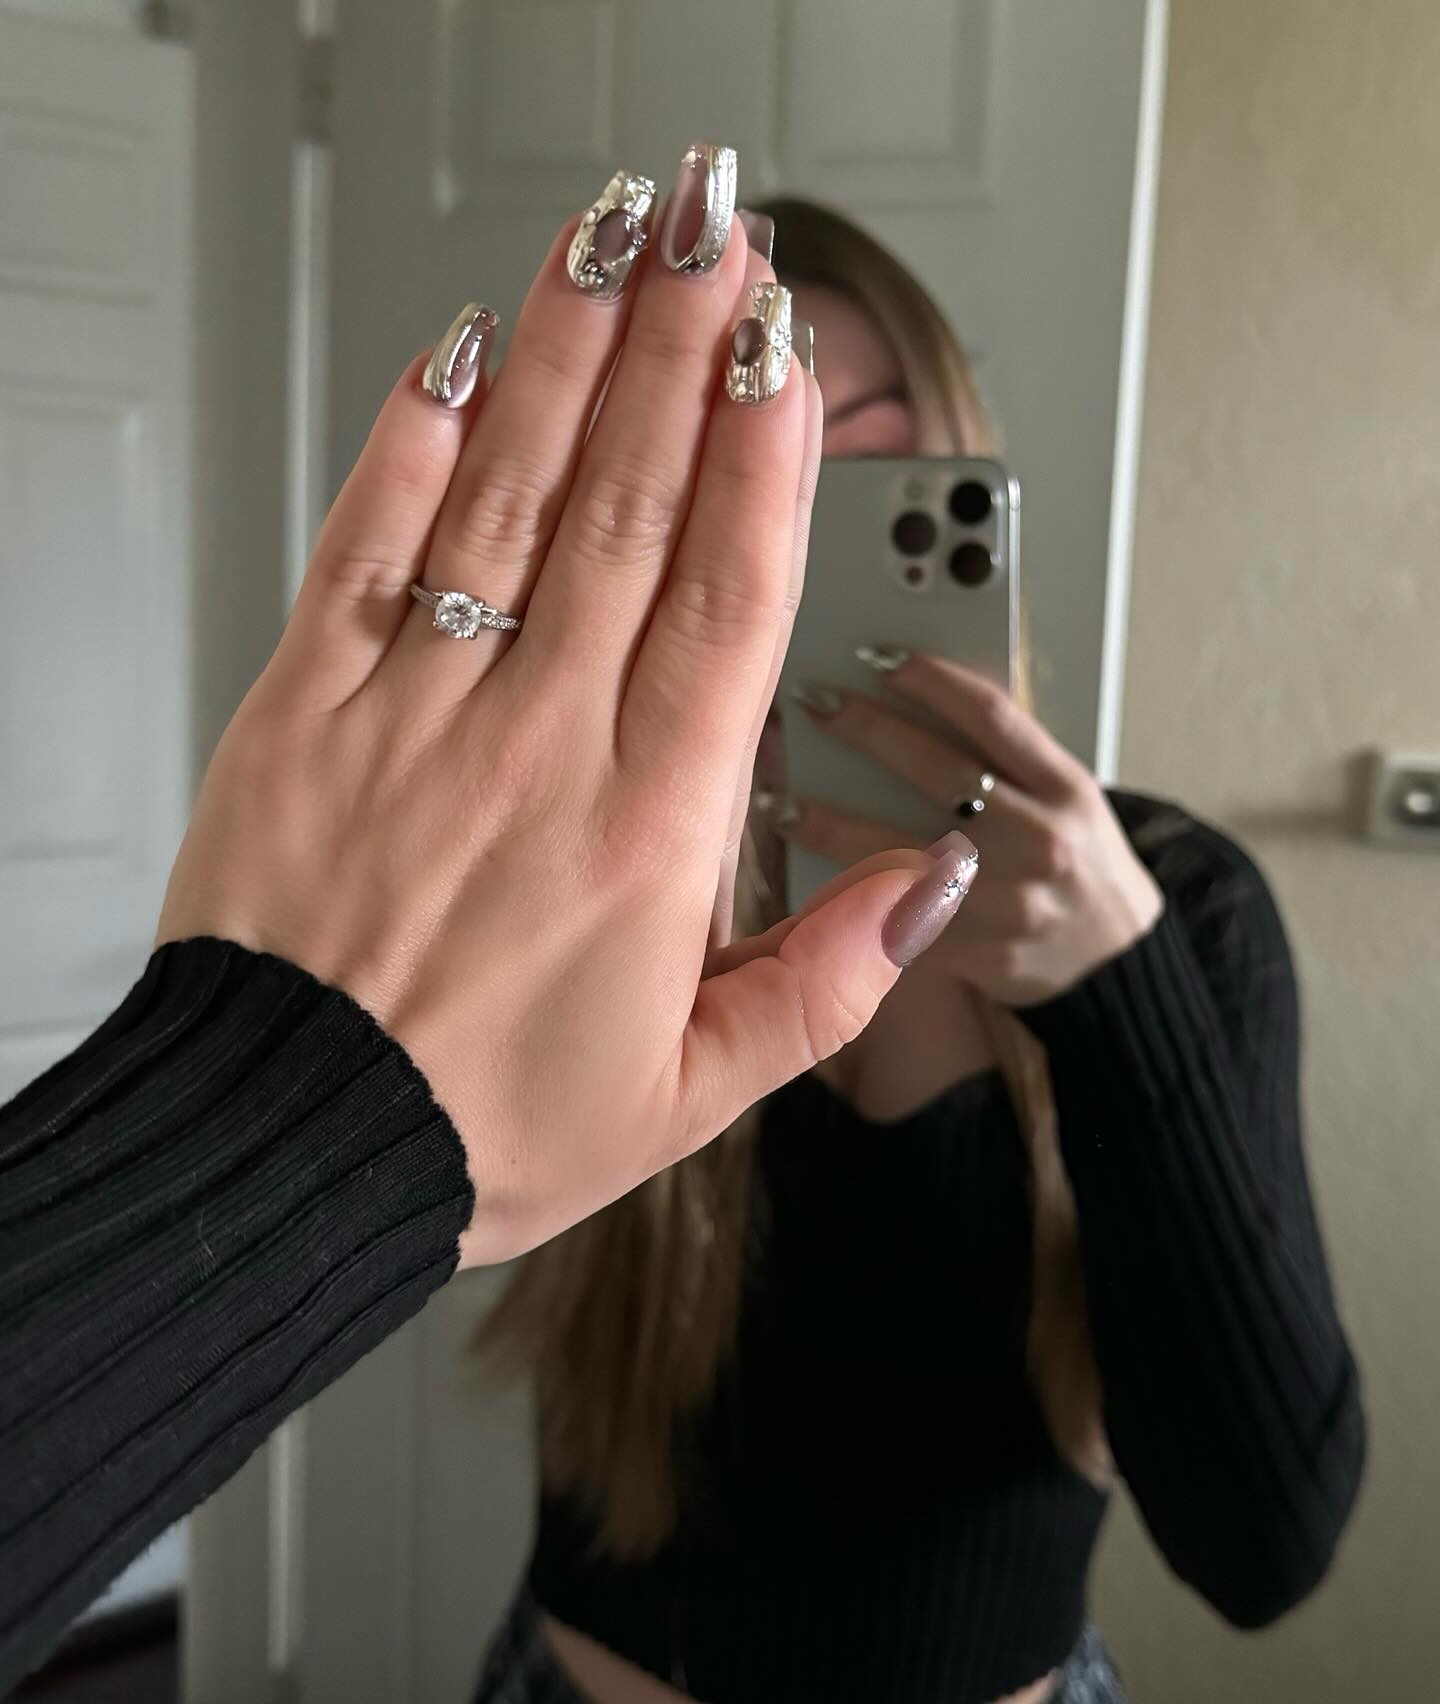 Happy Saturday! i hope everyone had a great week 🫶🏻 im over here feeling super cute in my press on nails from @mani.fenty_nail 💅🤩 i’ve been loving press ons lately because i don’t have to commit to nails full time and i love the convenience of wearing them whenever i want! 💘